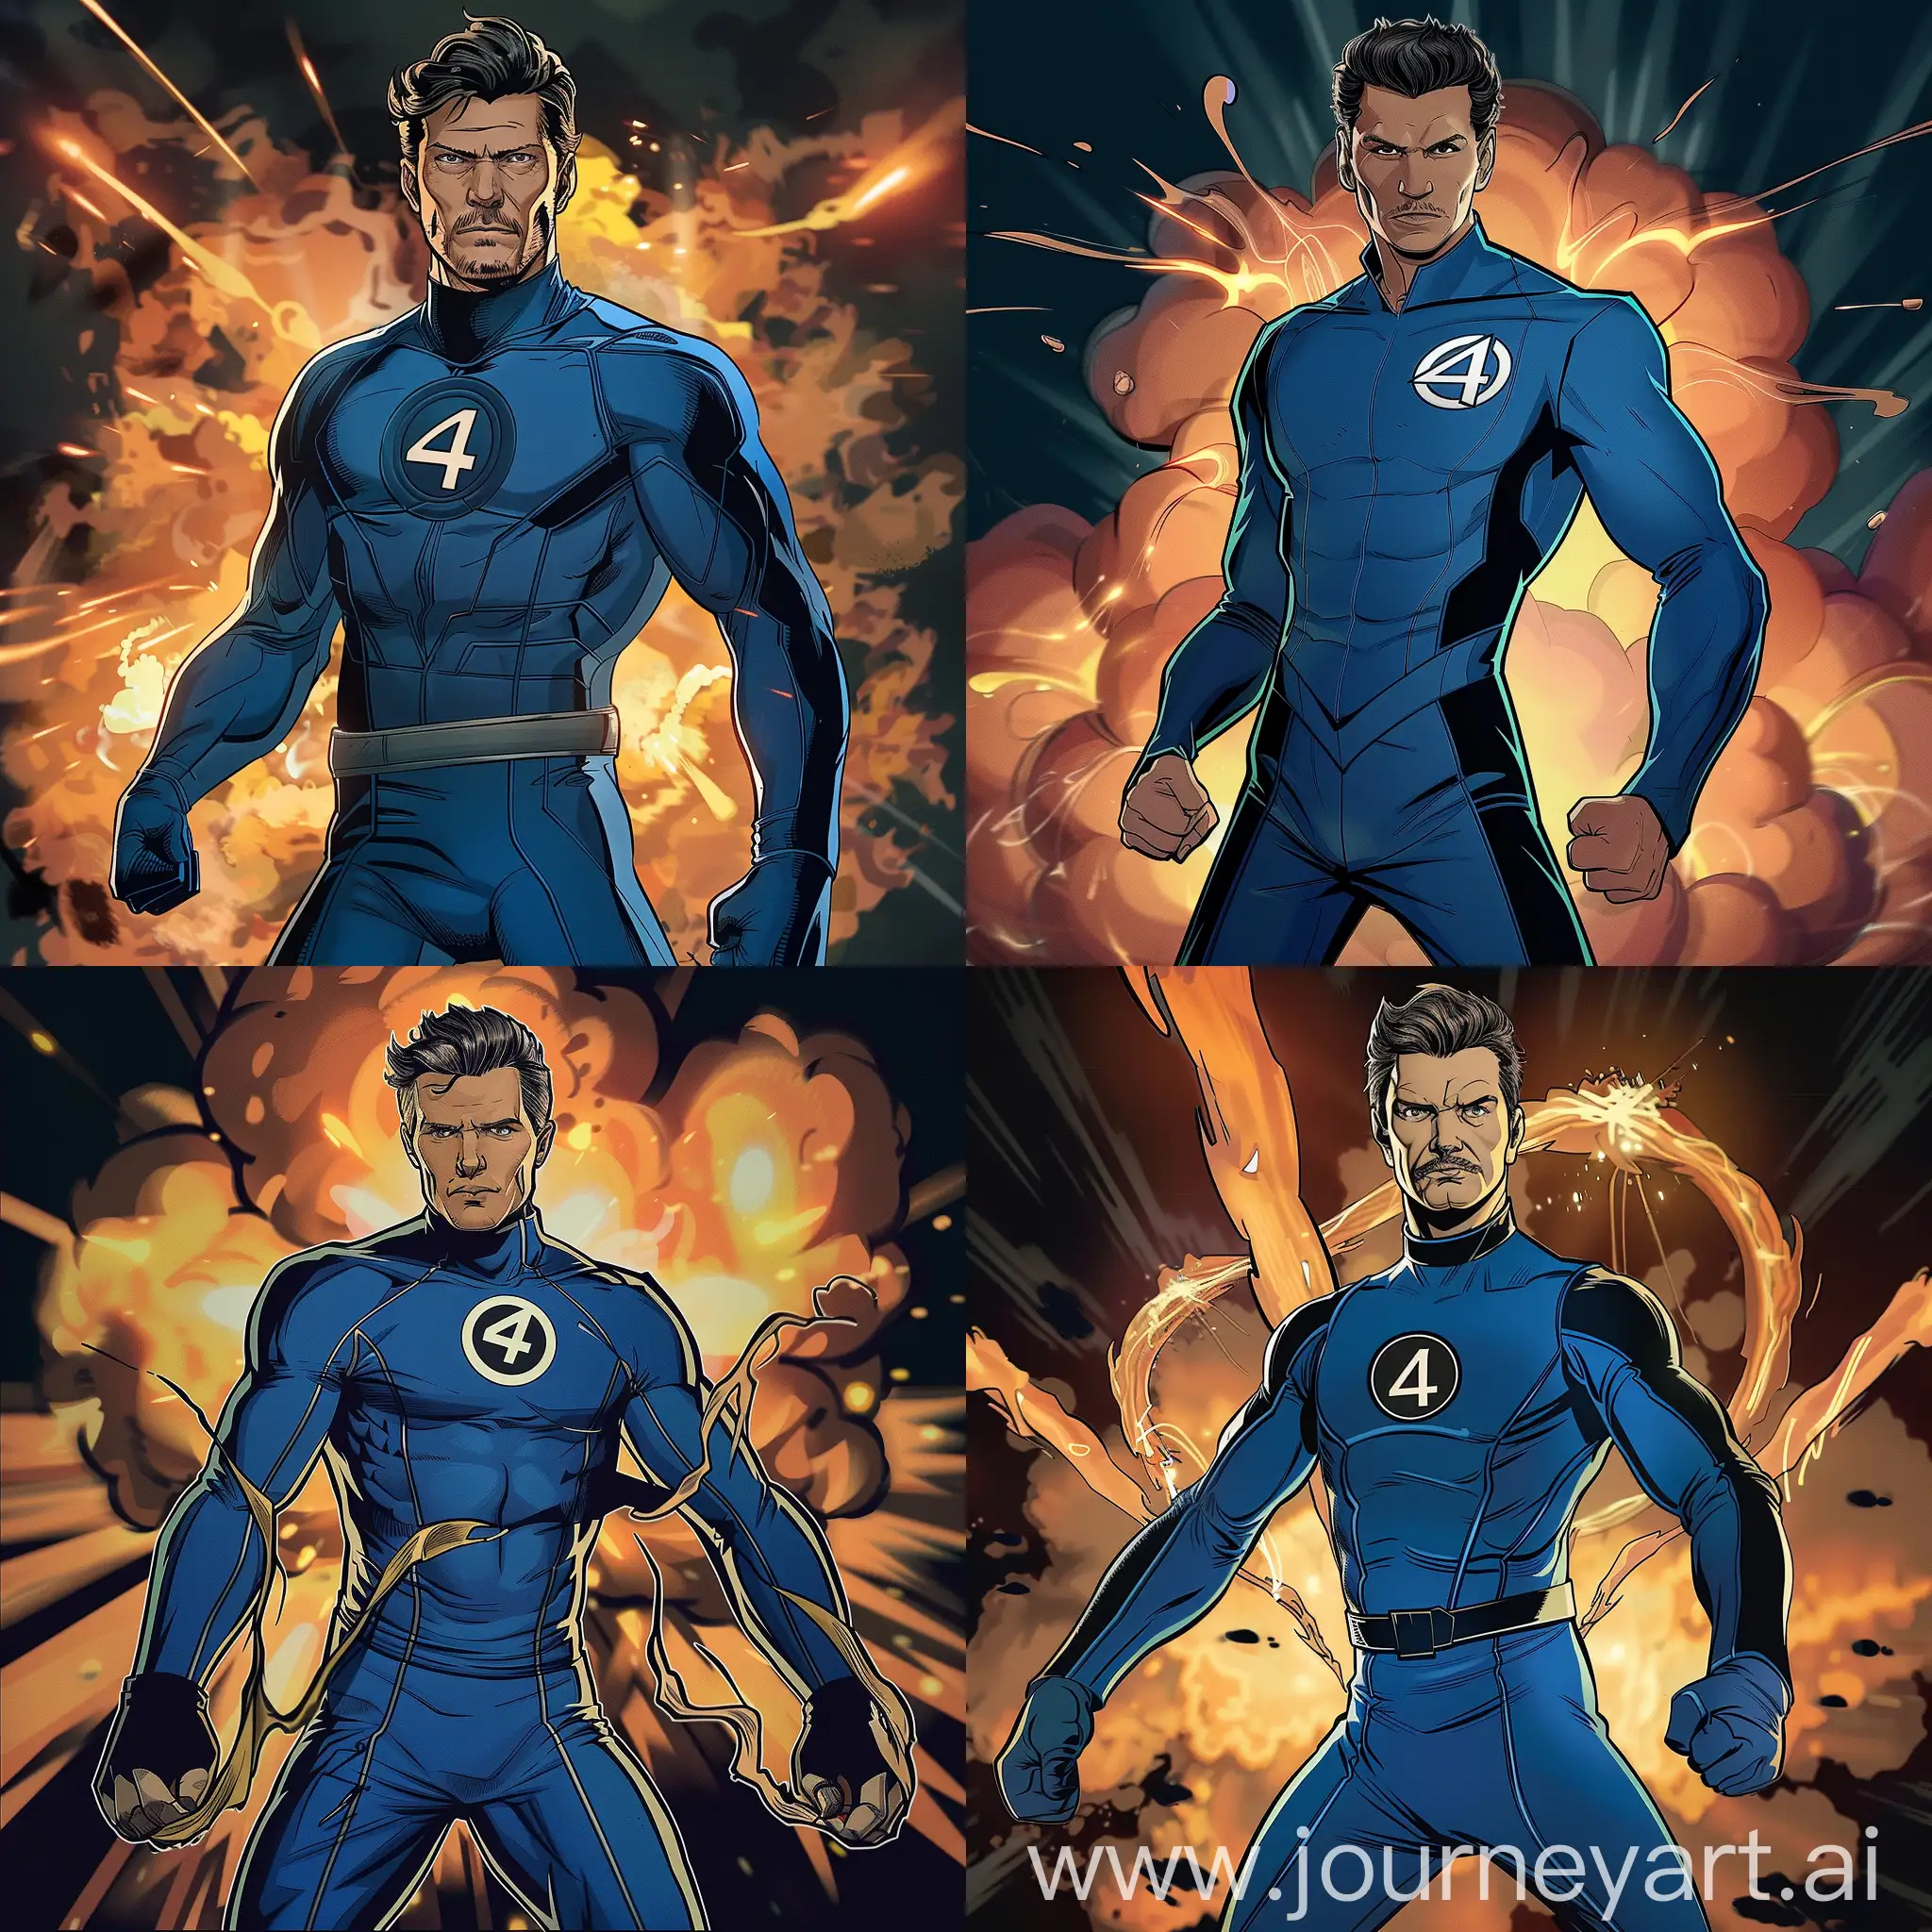 Pedro-Pascal-as-Mr-Fantastic-Heroic-Comic-Style-Illustration-with-Explosive-Background